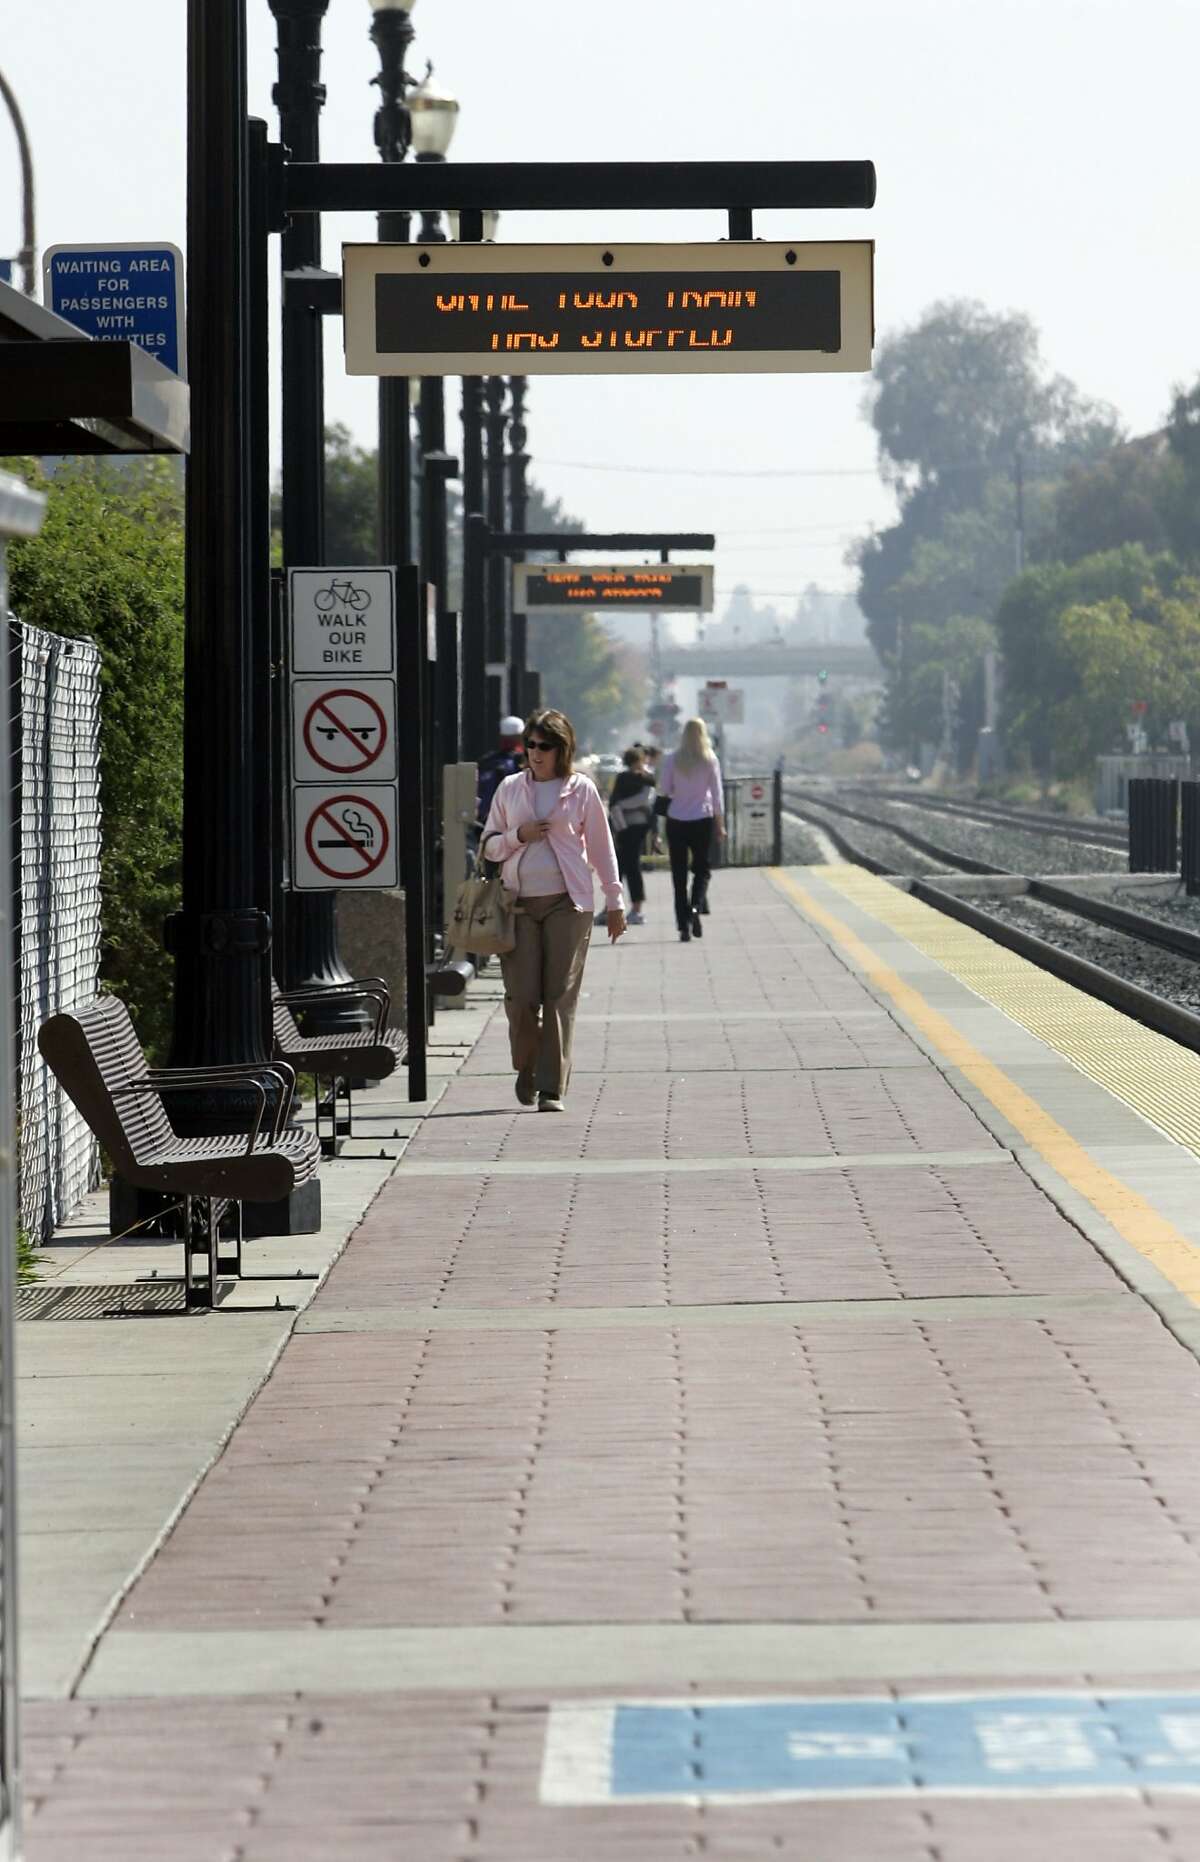 In this file photo, people walking about at the Caltrain station in Redwood City.